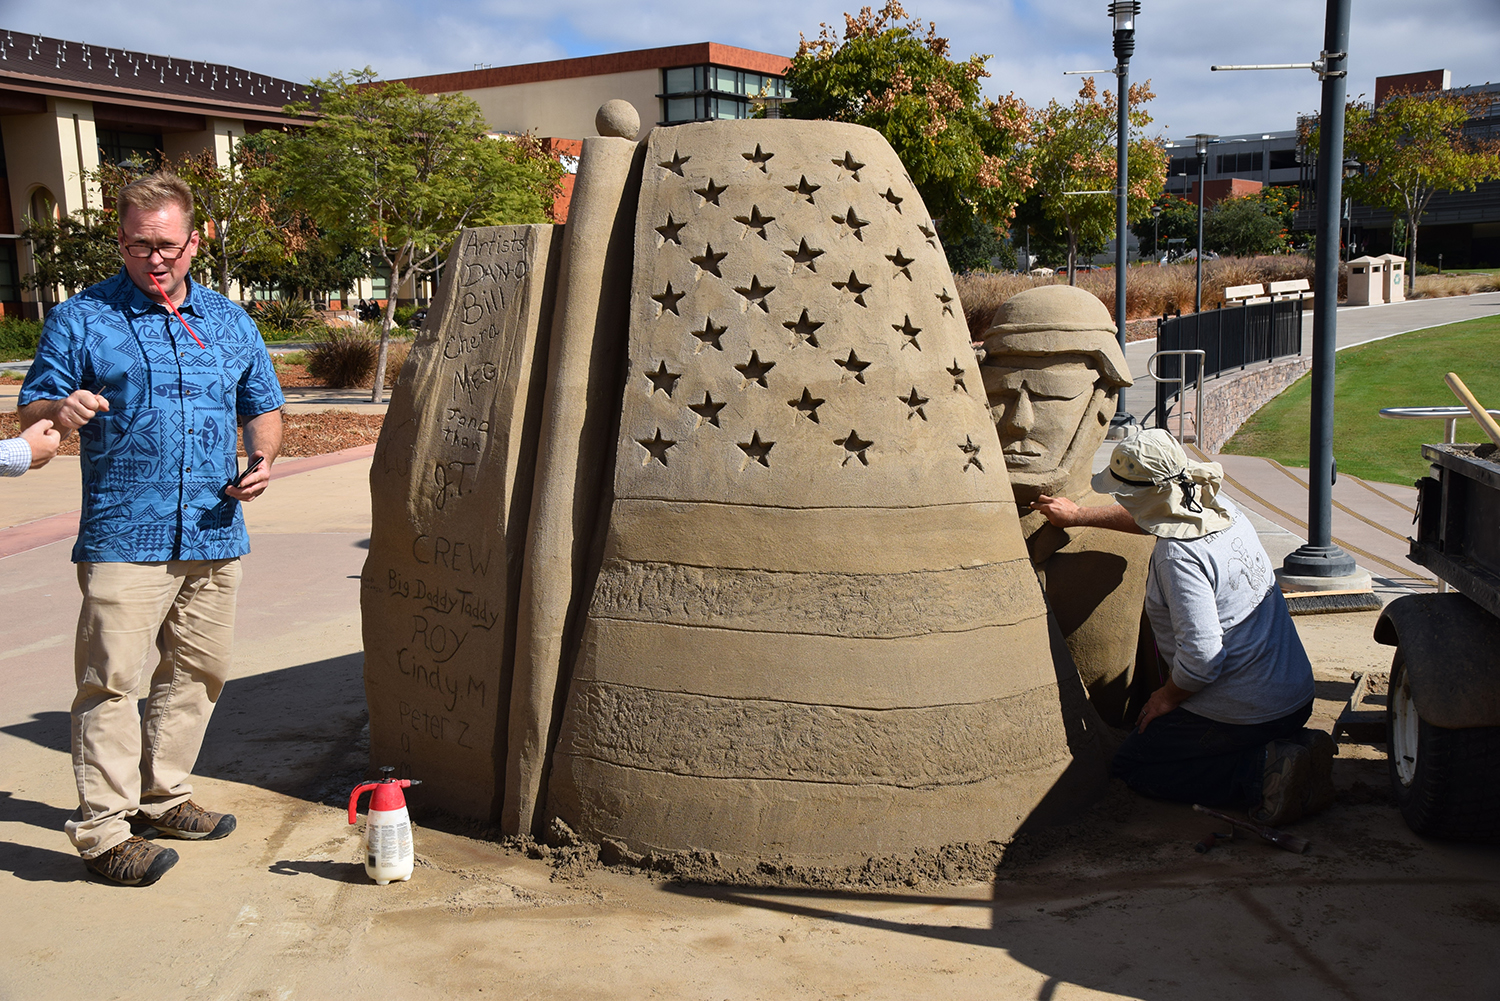 Dan Gutowski left directs the construction of a sand sculpture for veterans day. The sculpture is of a soldier's head with a helmet and a sand wall with stars carved into it.